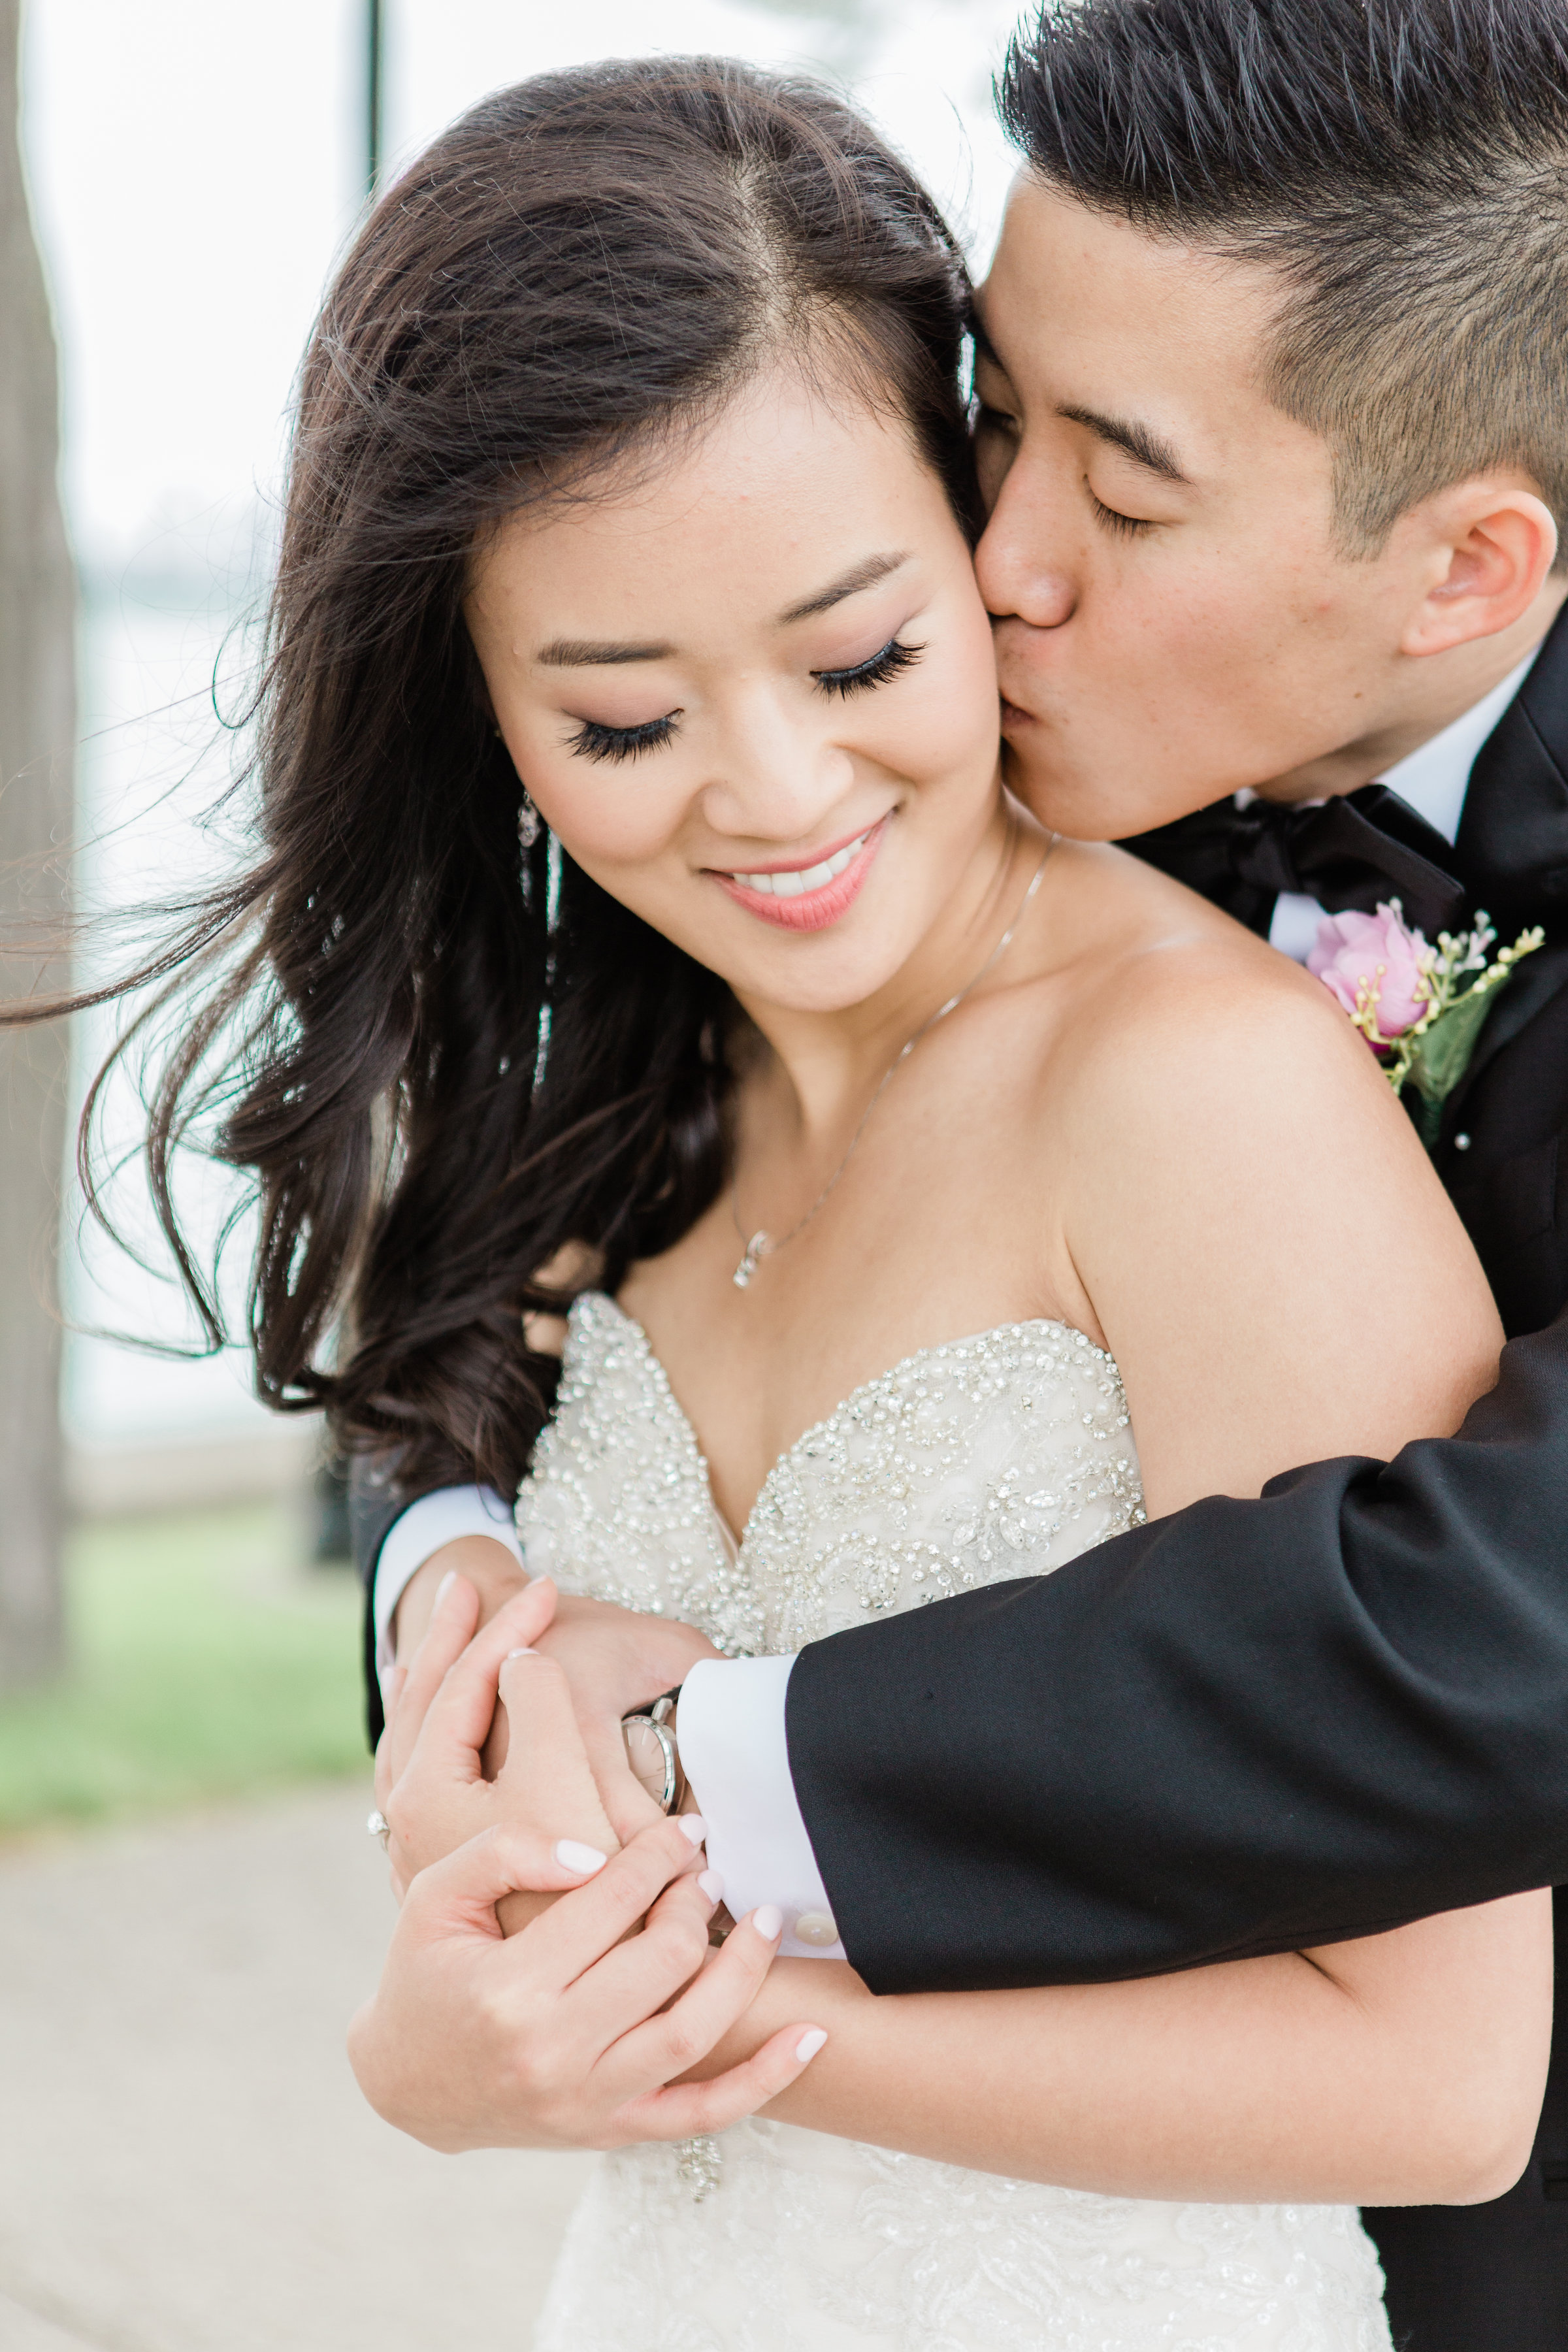 Tips for Posing for Wedding Photos Photography by Lauryn